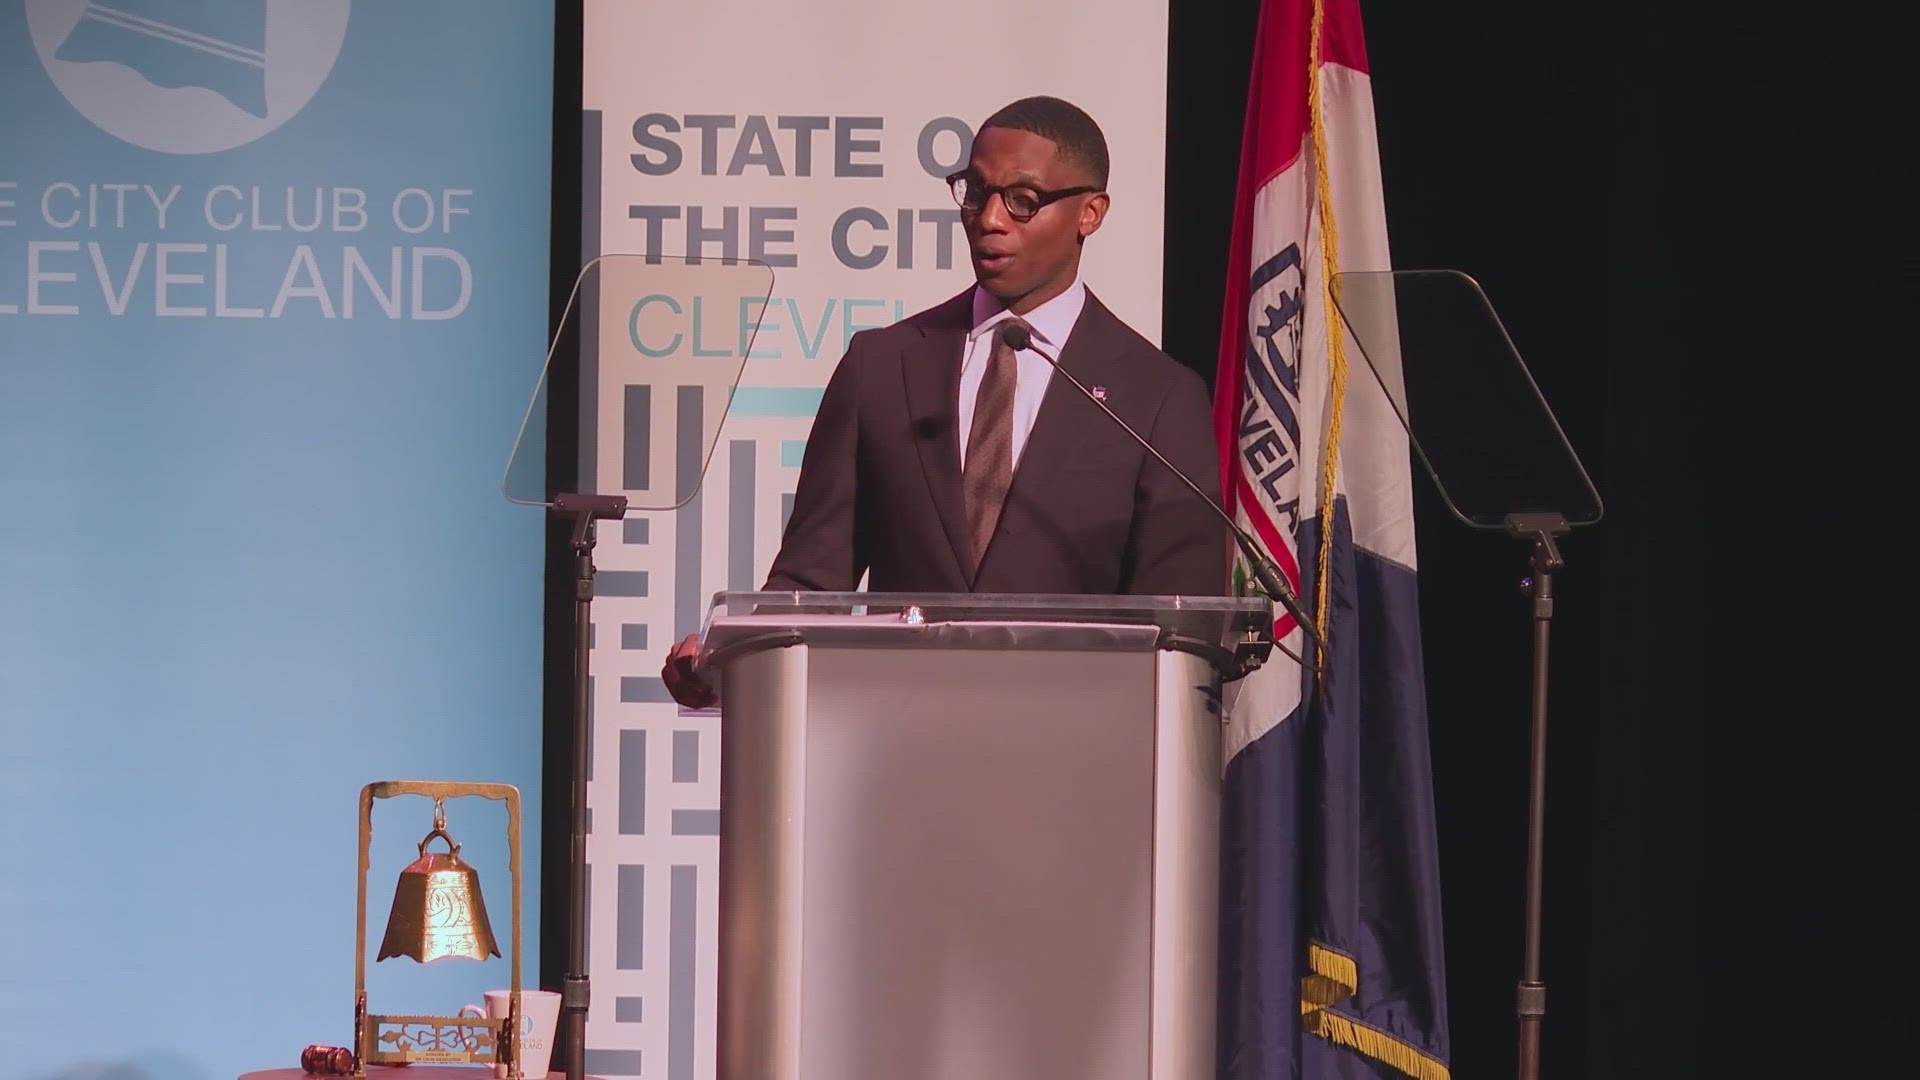 Mayor Bibb addressed crime, public safety, the lakefront and more during his speech at the Mimi Ohio Theatre at Playhouse Square.